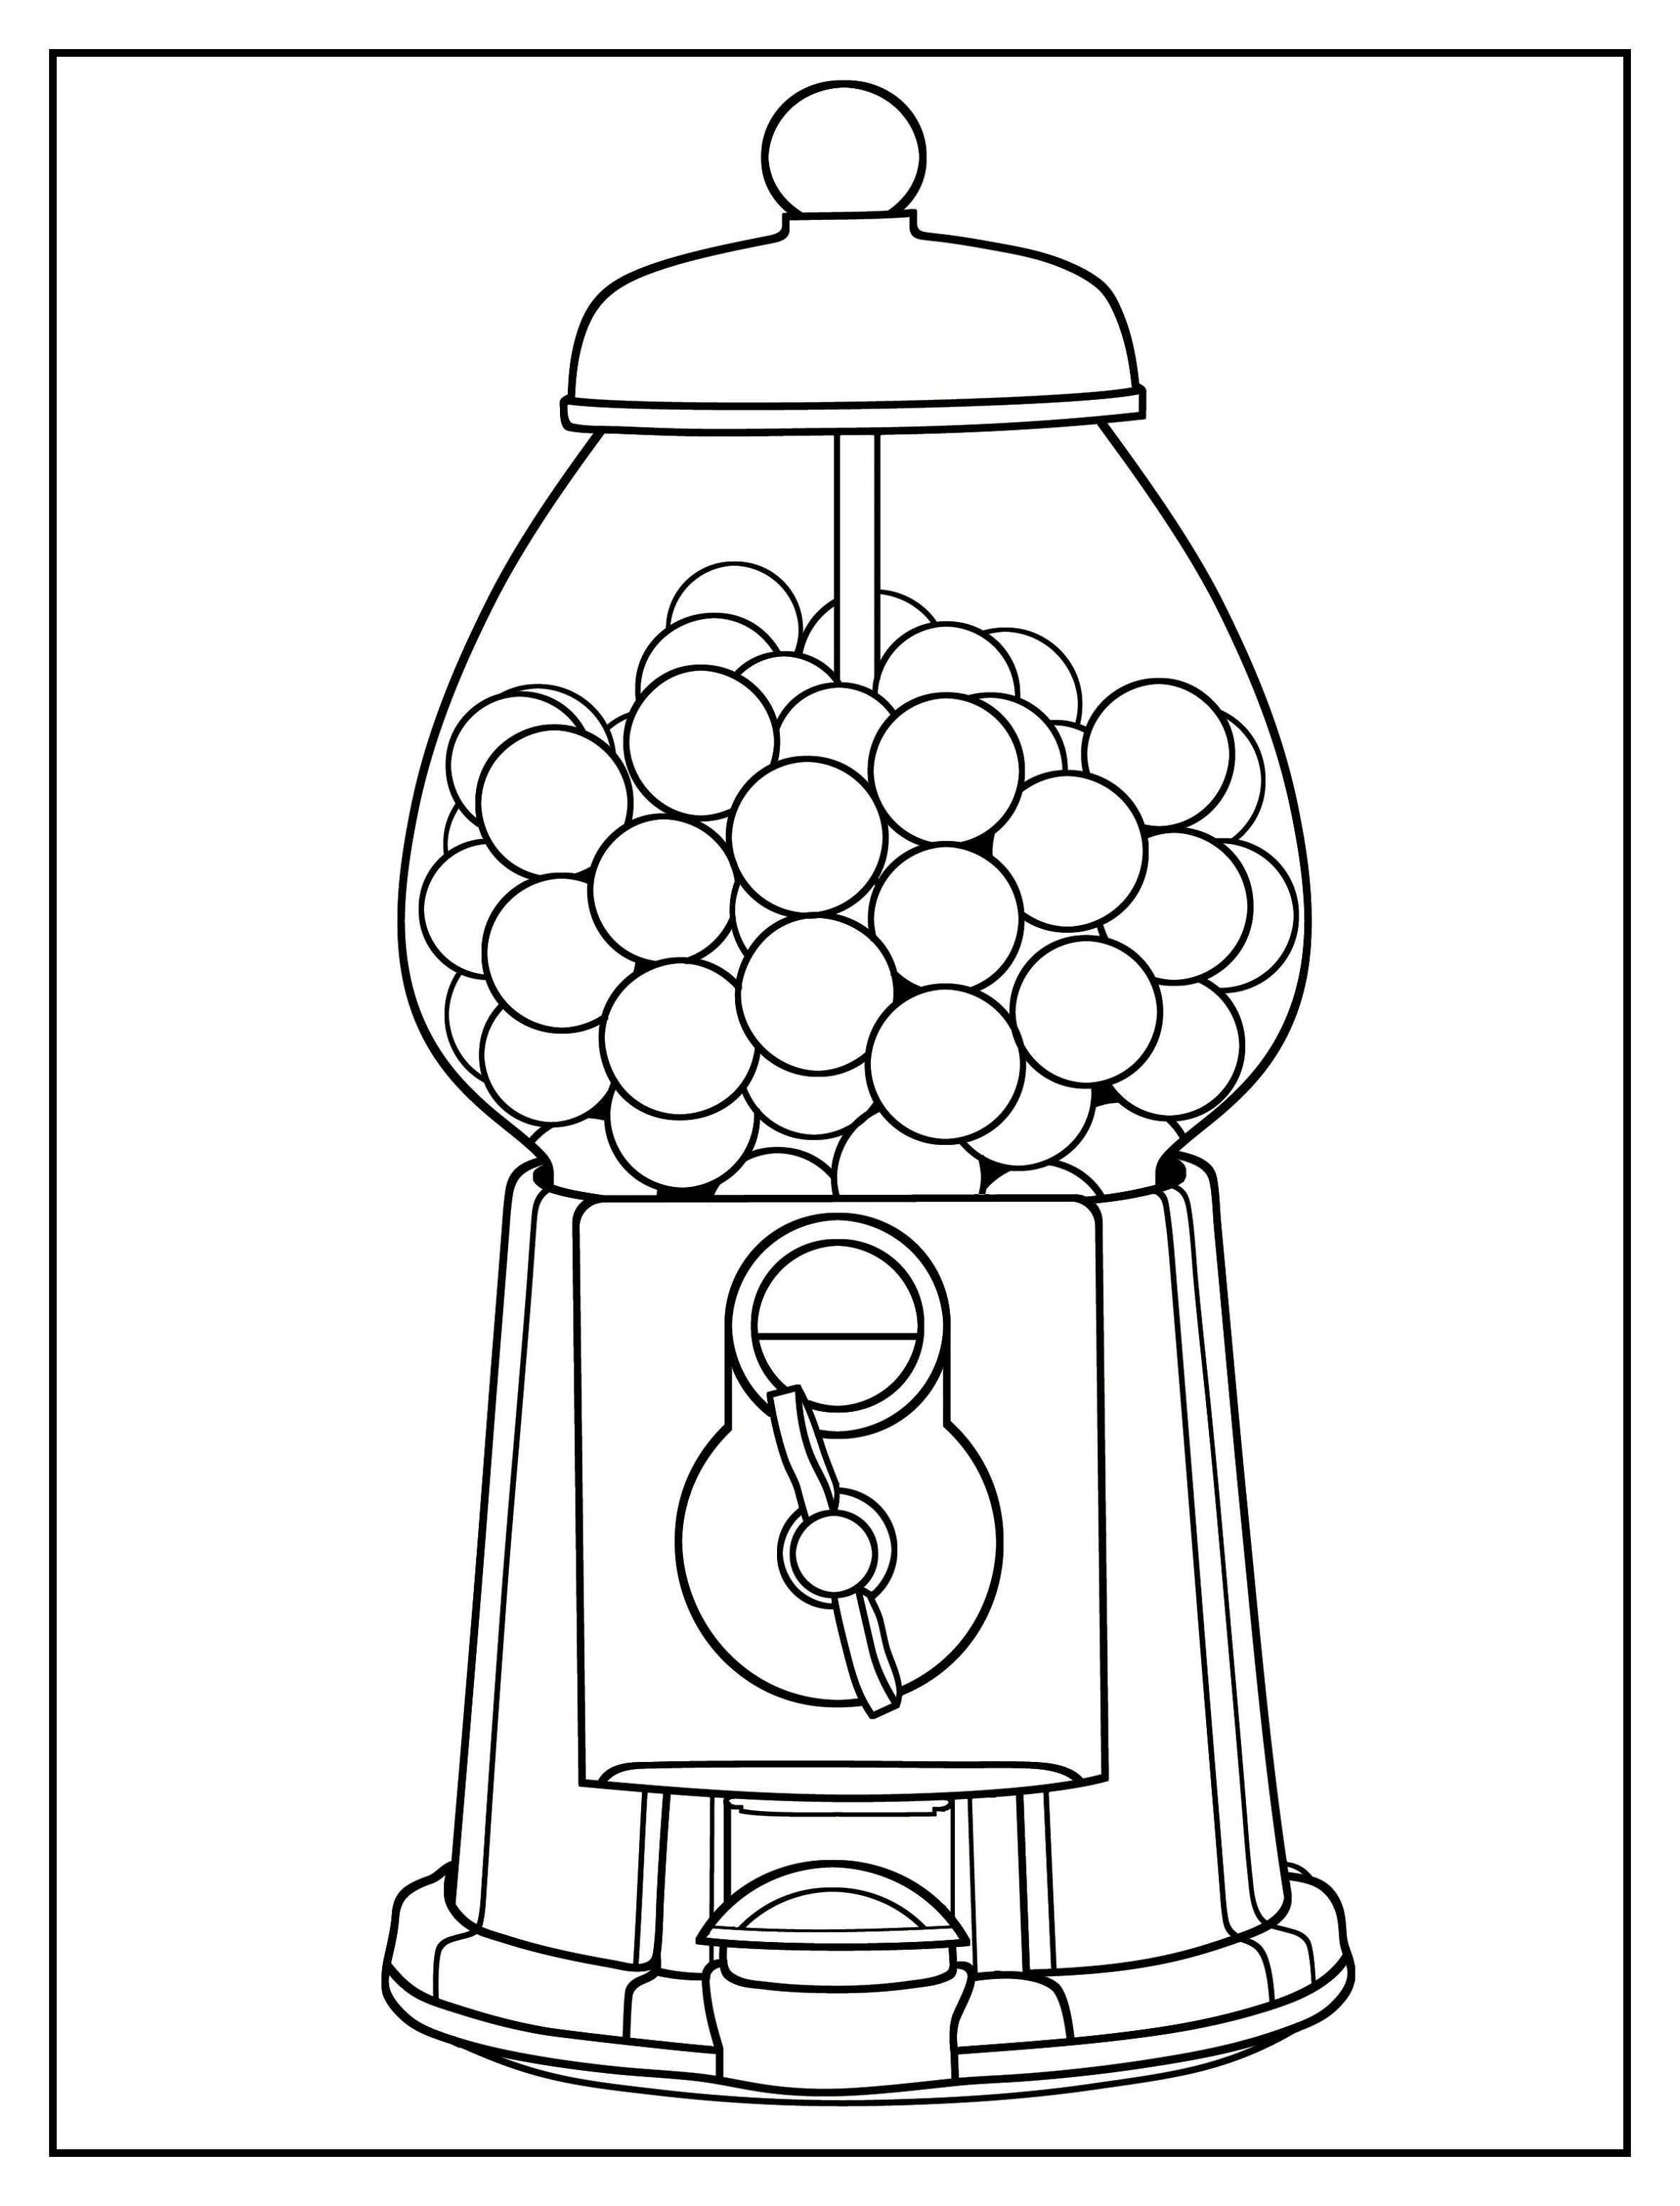 Gumball machine coloring page k worksheets easy coloring pages cool coloring pages free adult coloring pages